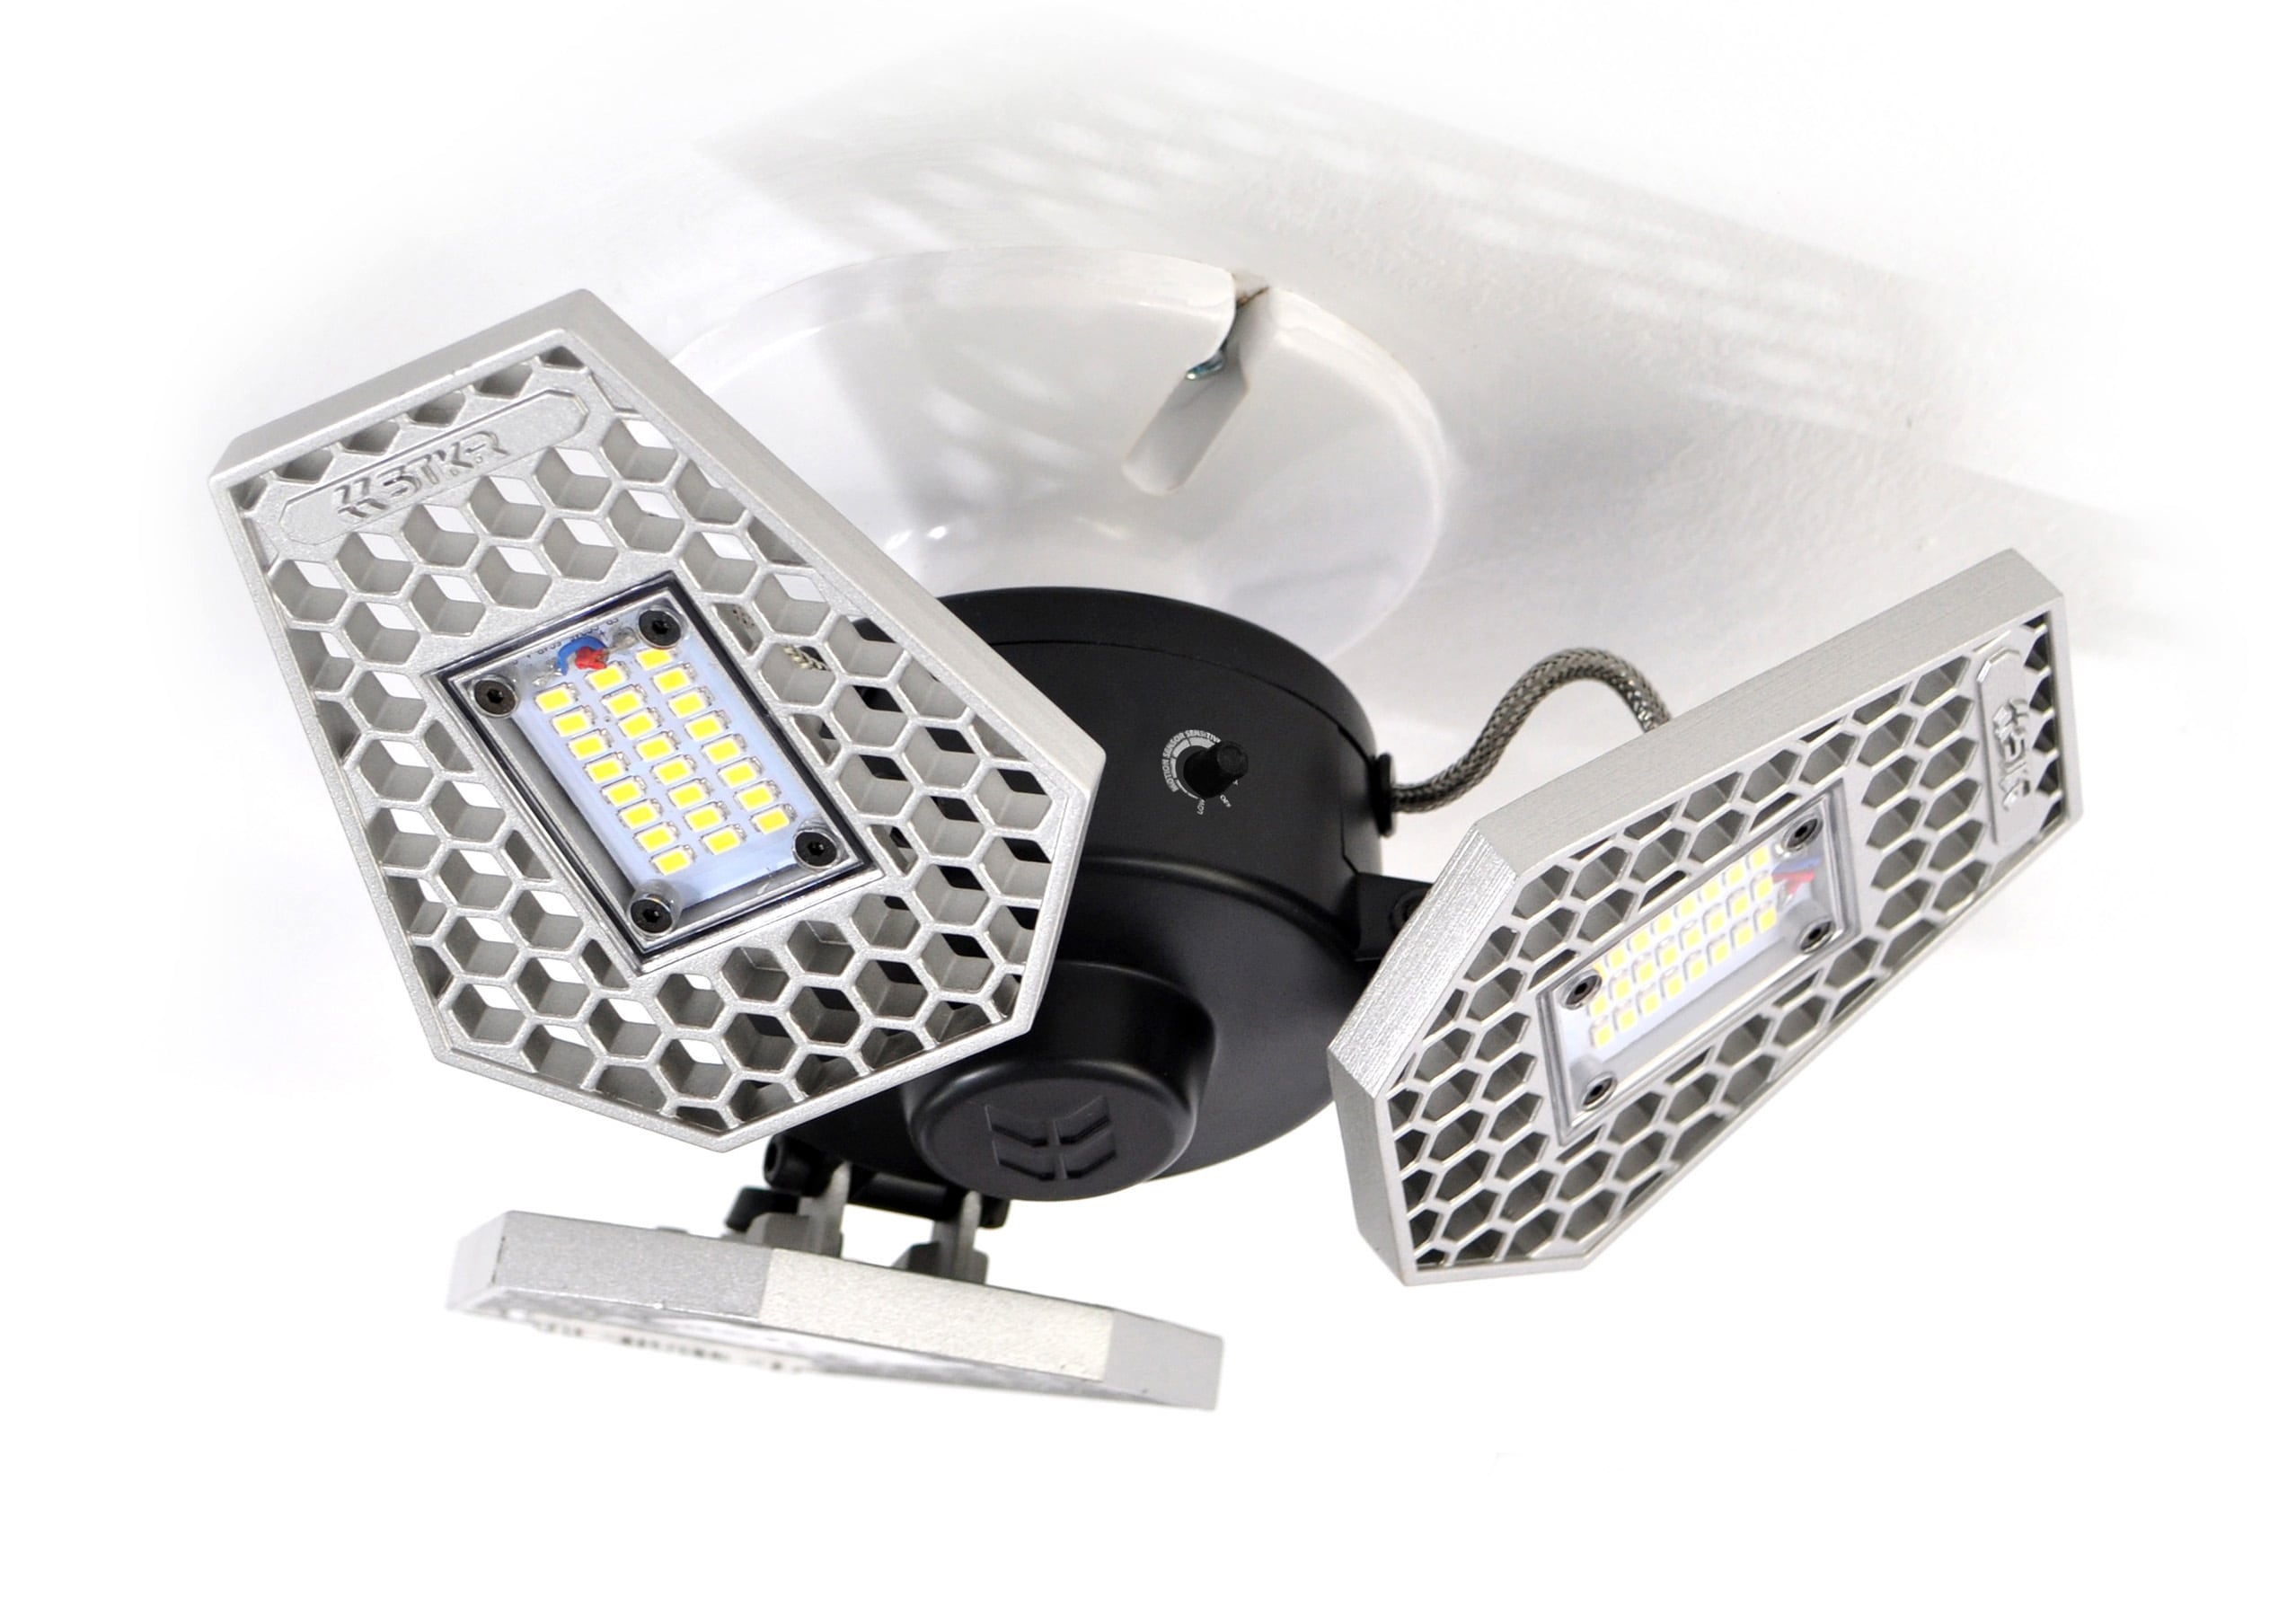 Stkr 24 Watt Led Stainless Steel Plug In Ceiling Mounted Work Light The Lights Department At Lowes Com